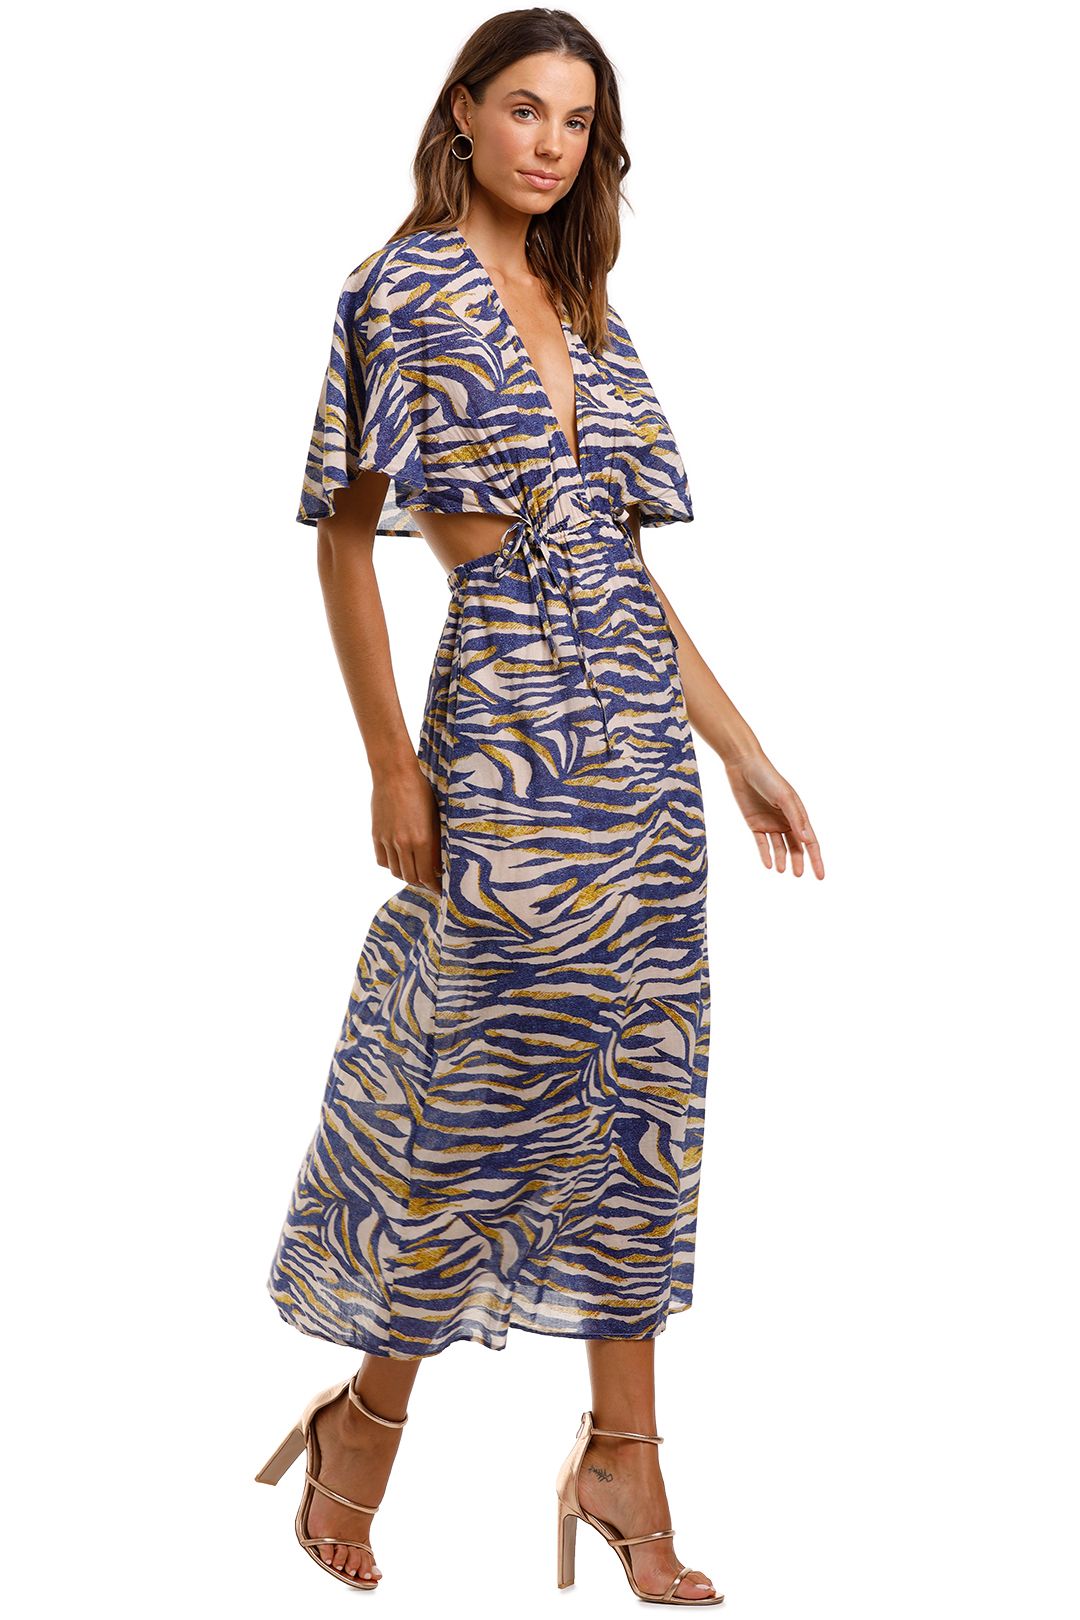 Suboo Into The Wilds Cape Dress Animal Print Maxi